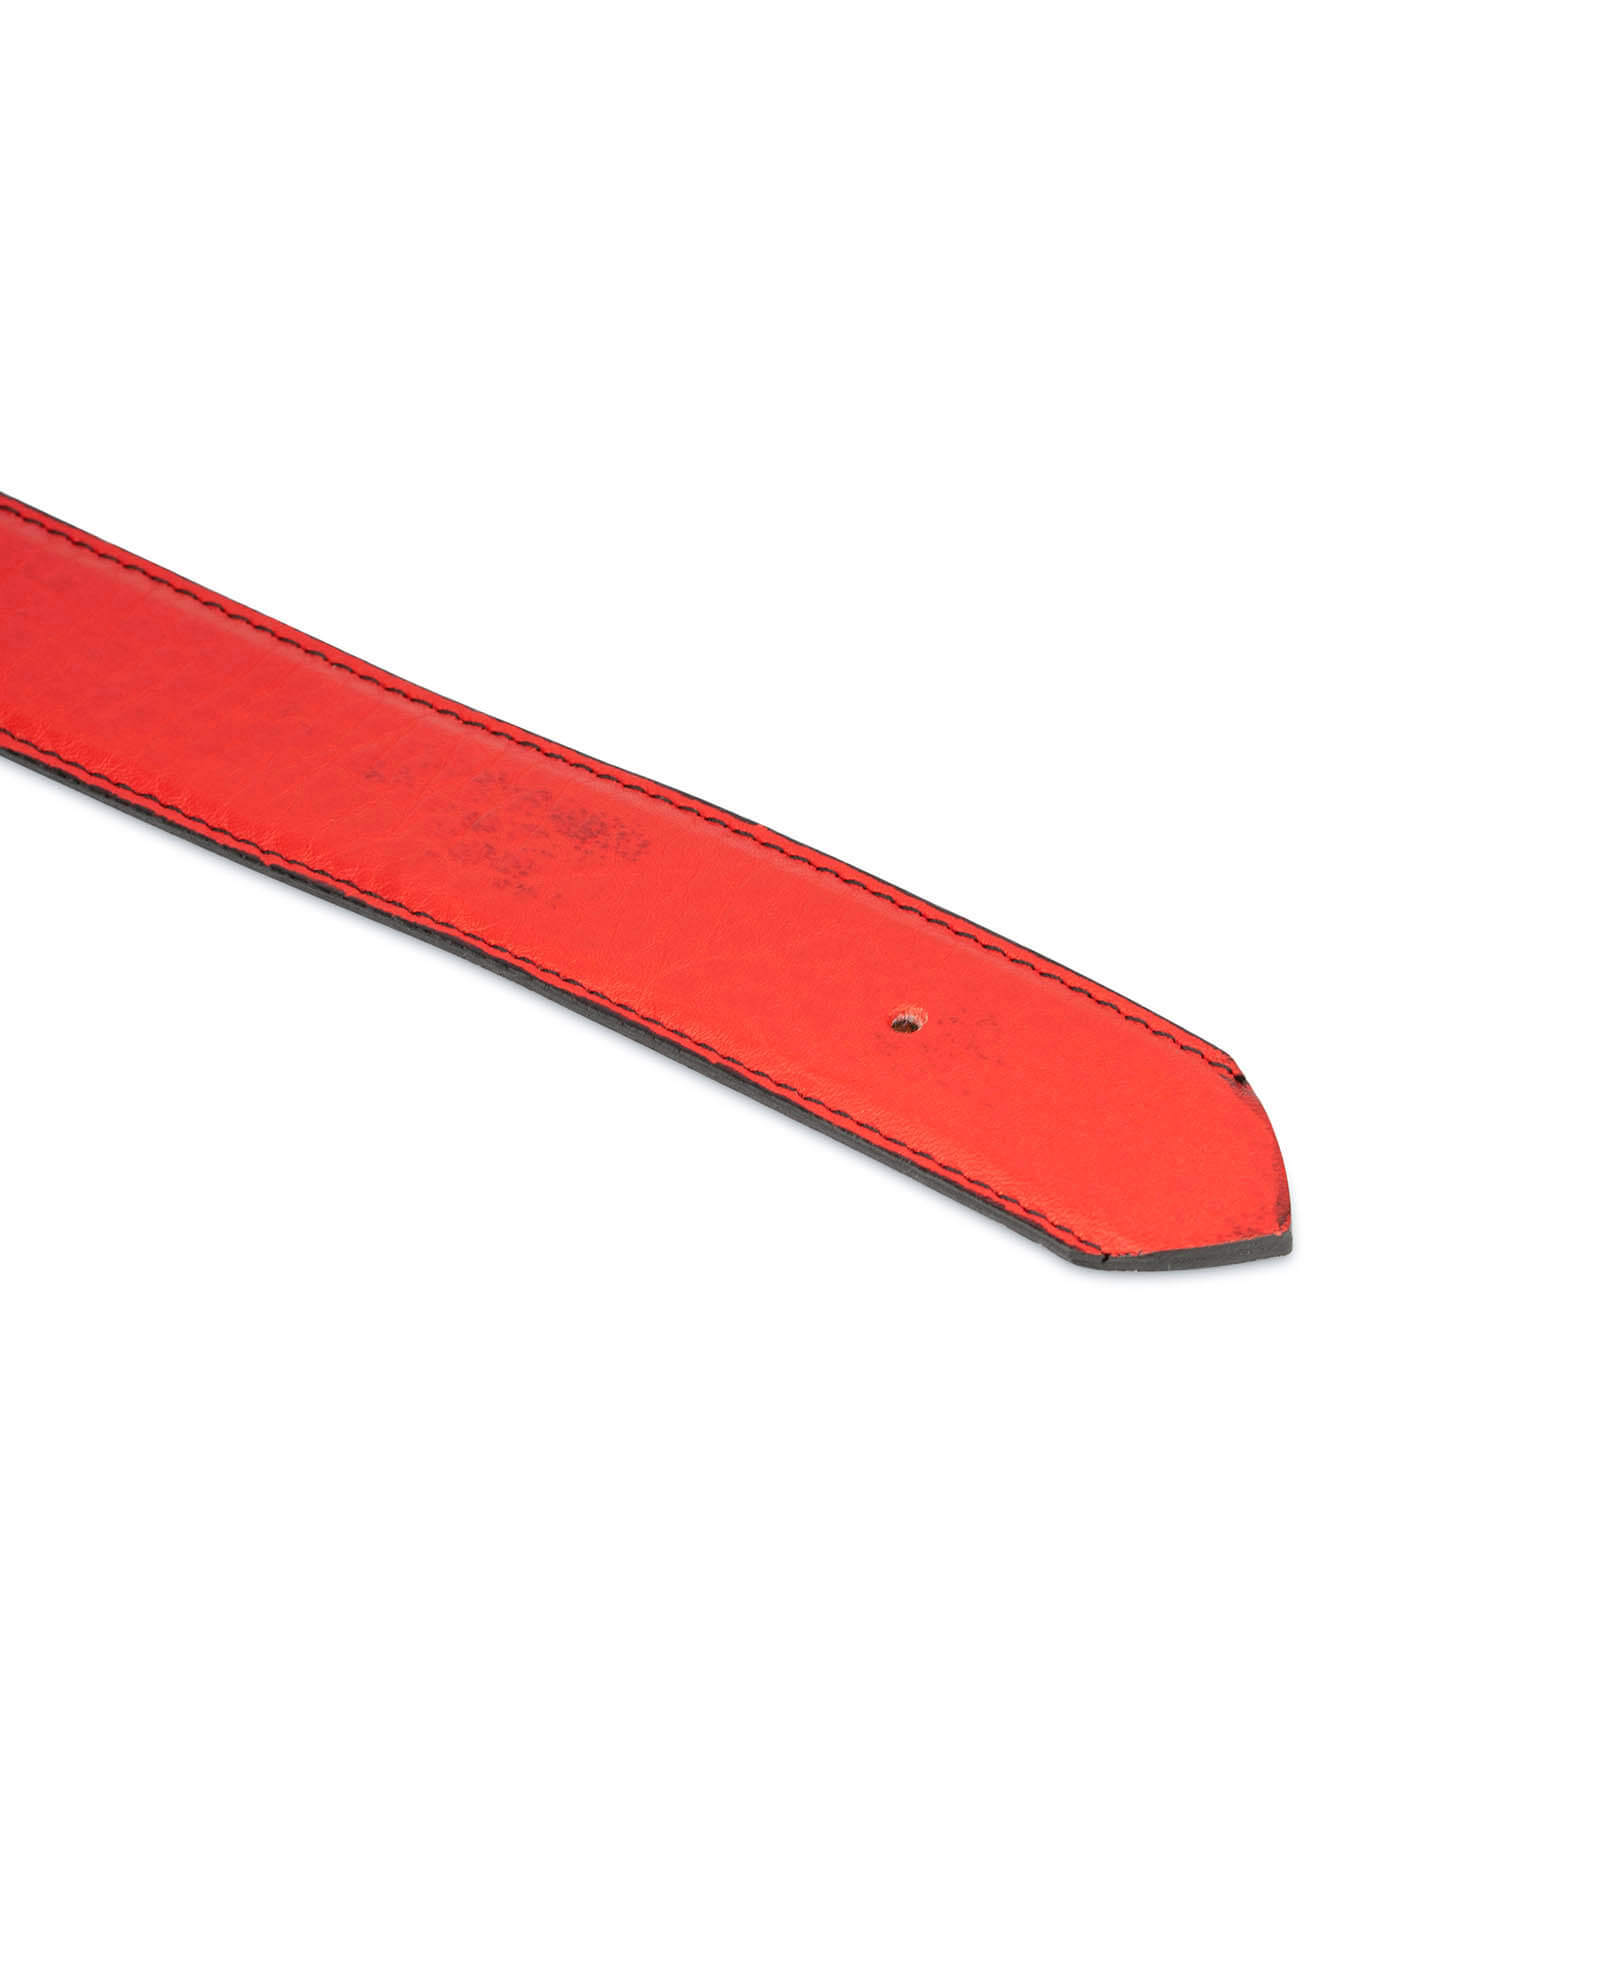 Replacement Men's Red Belt Strap 40'' / 100 cm - Red | Capo Pelle